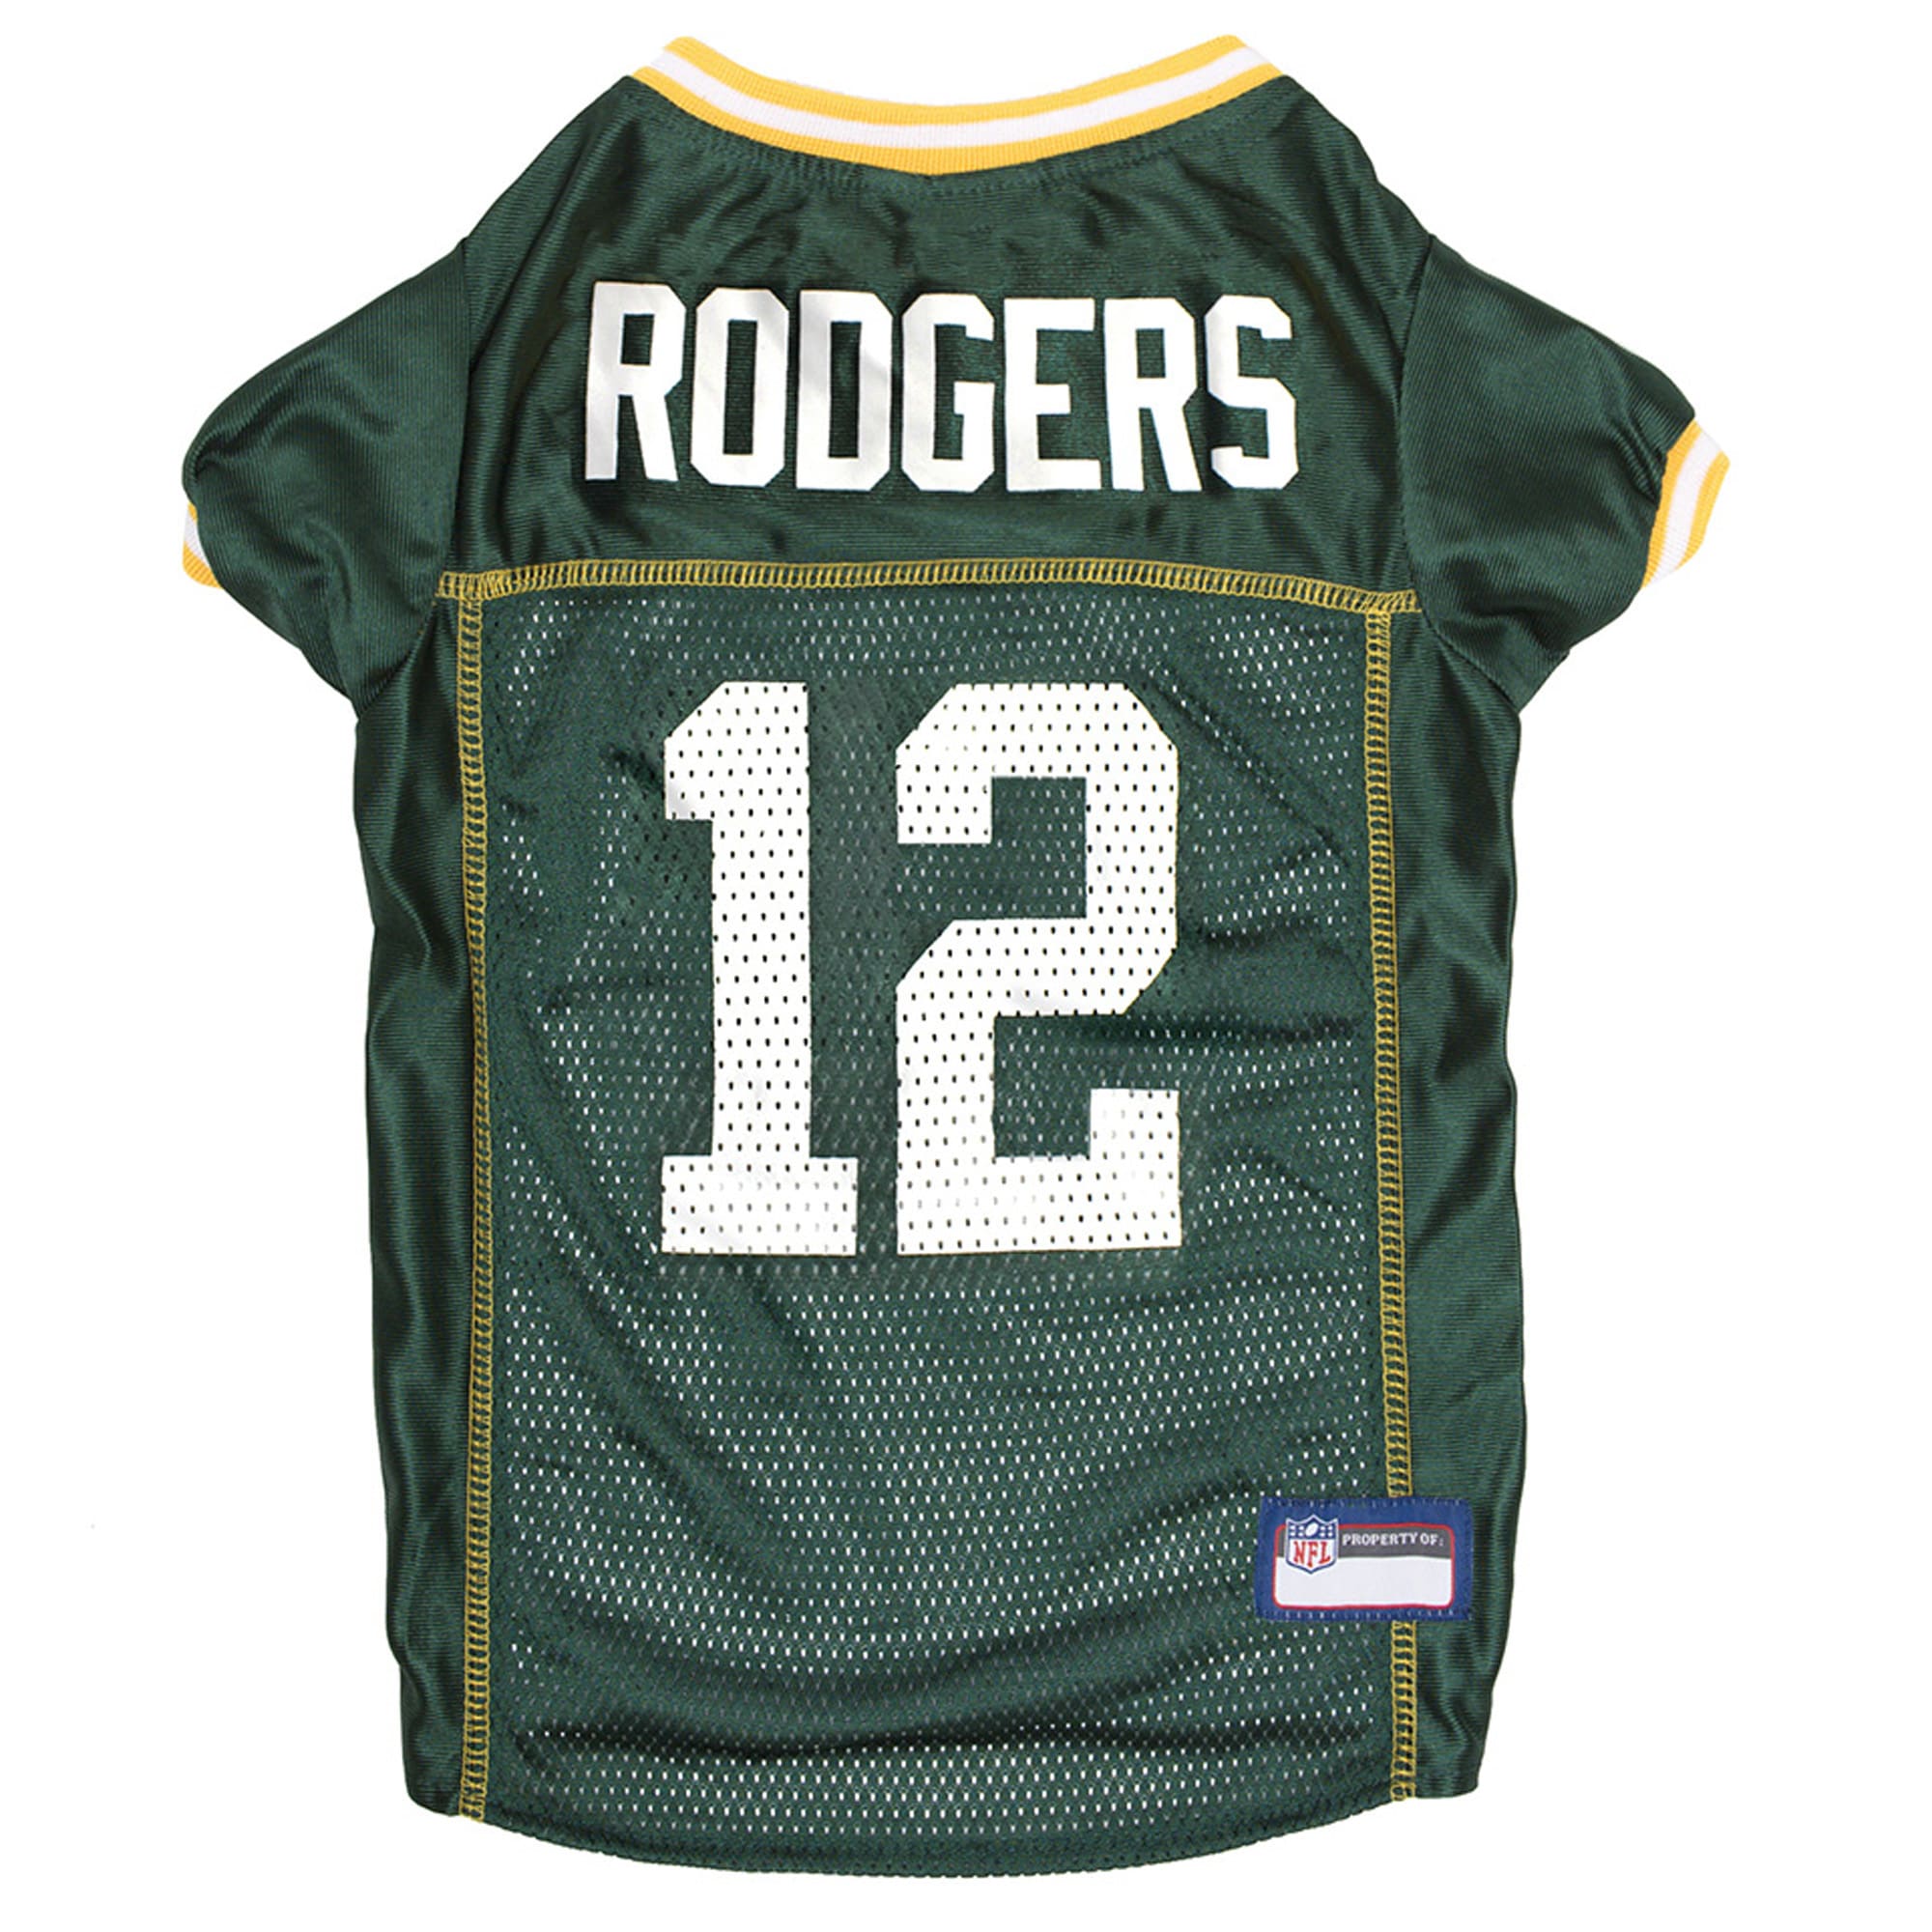 Pets First Aaron Rodgers Jersey (GBP) for Dogs, X-Small, Multi-Color